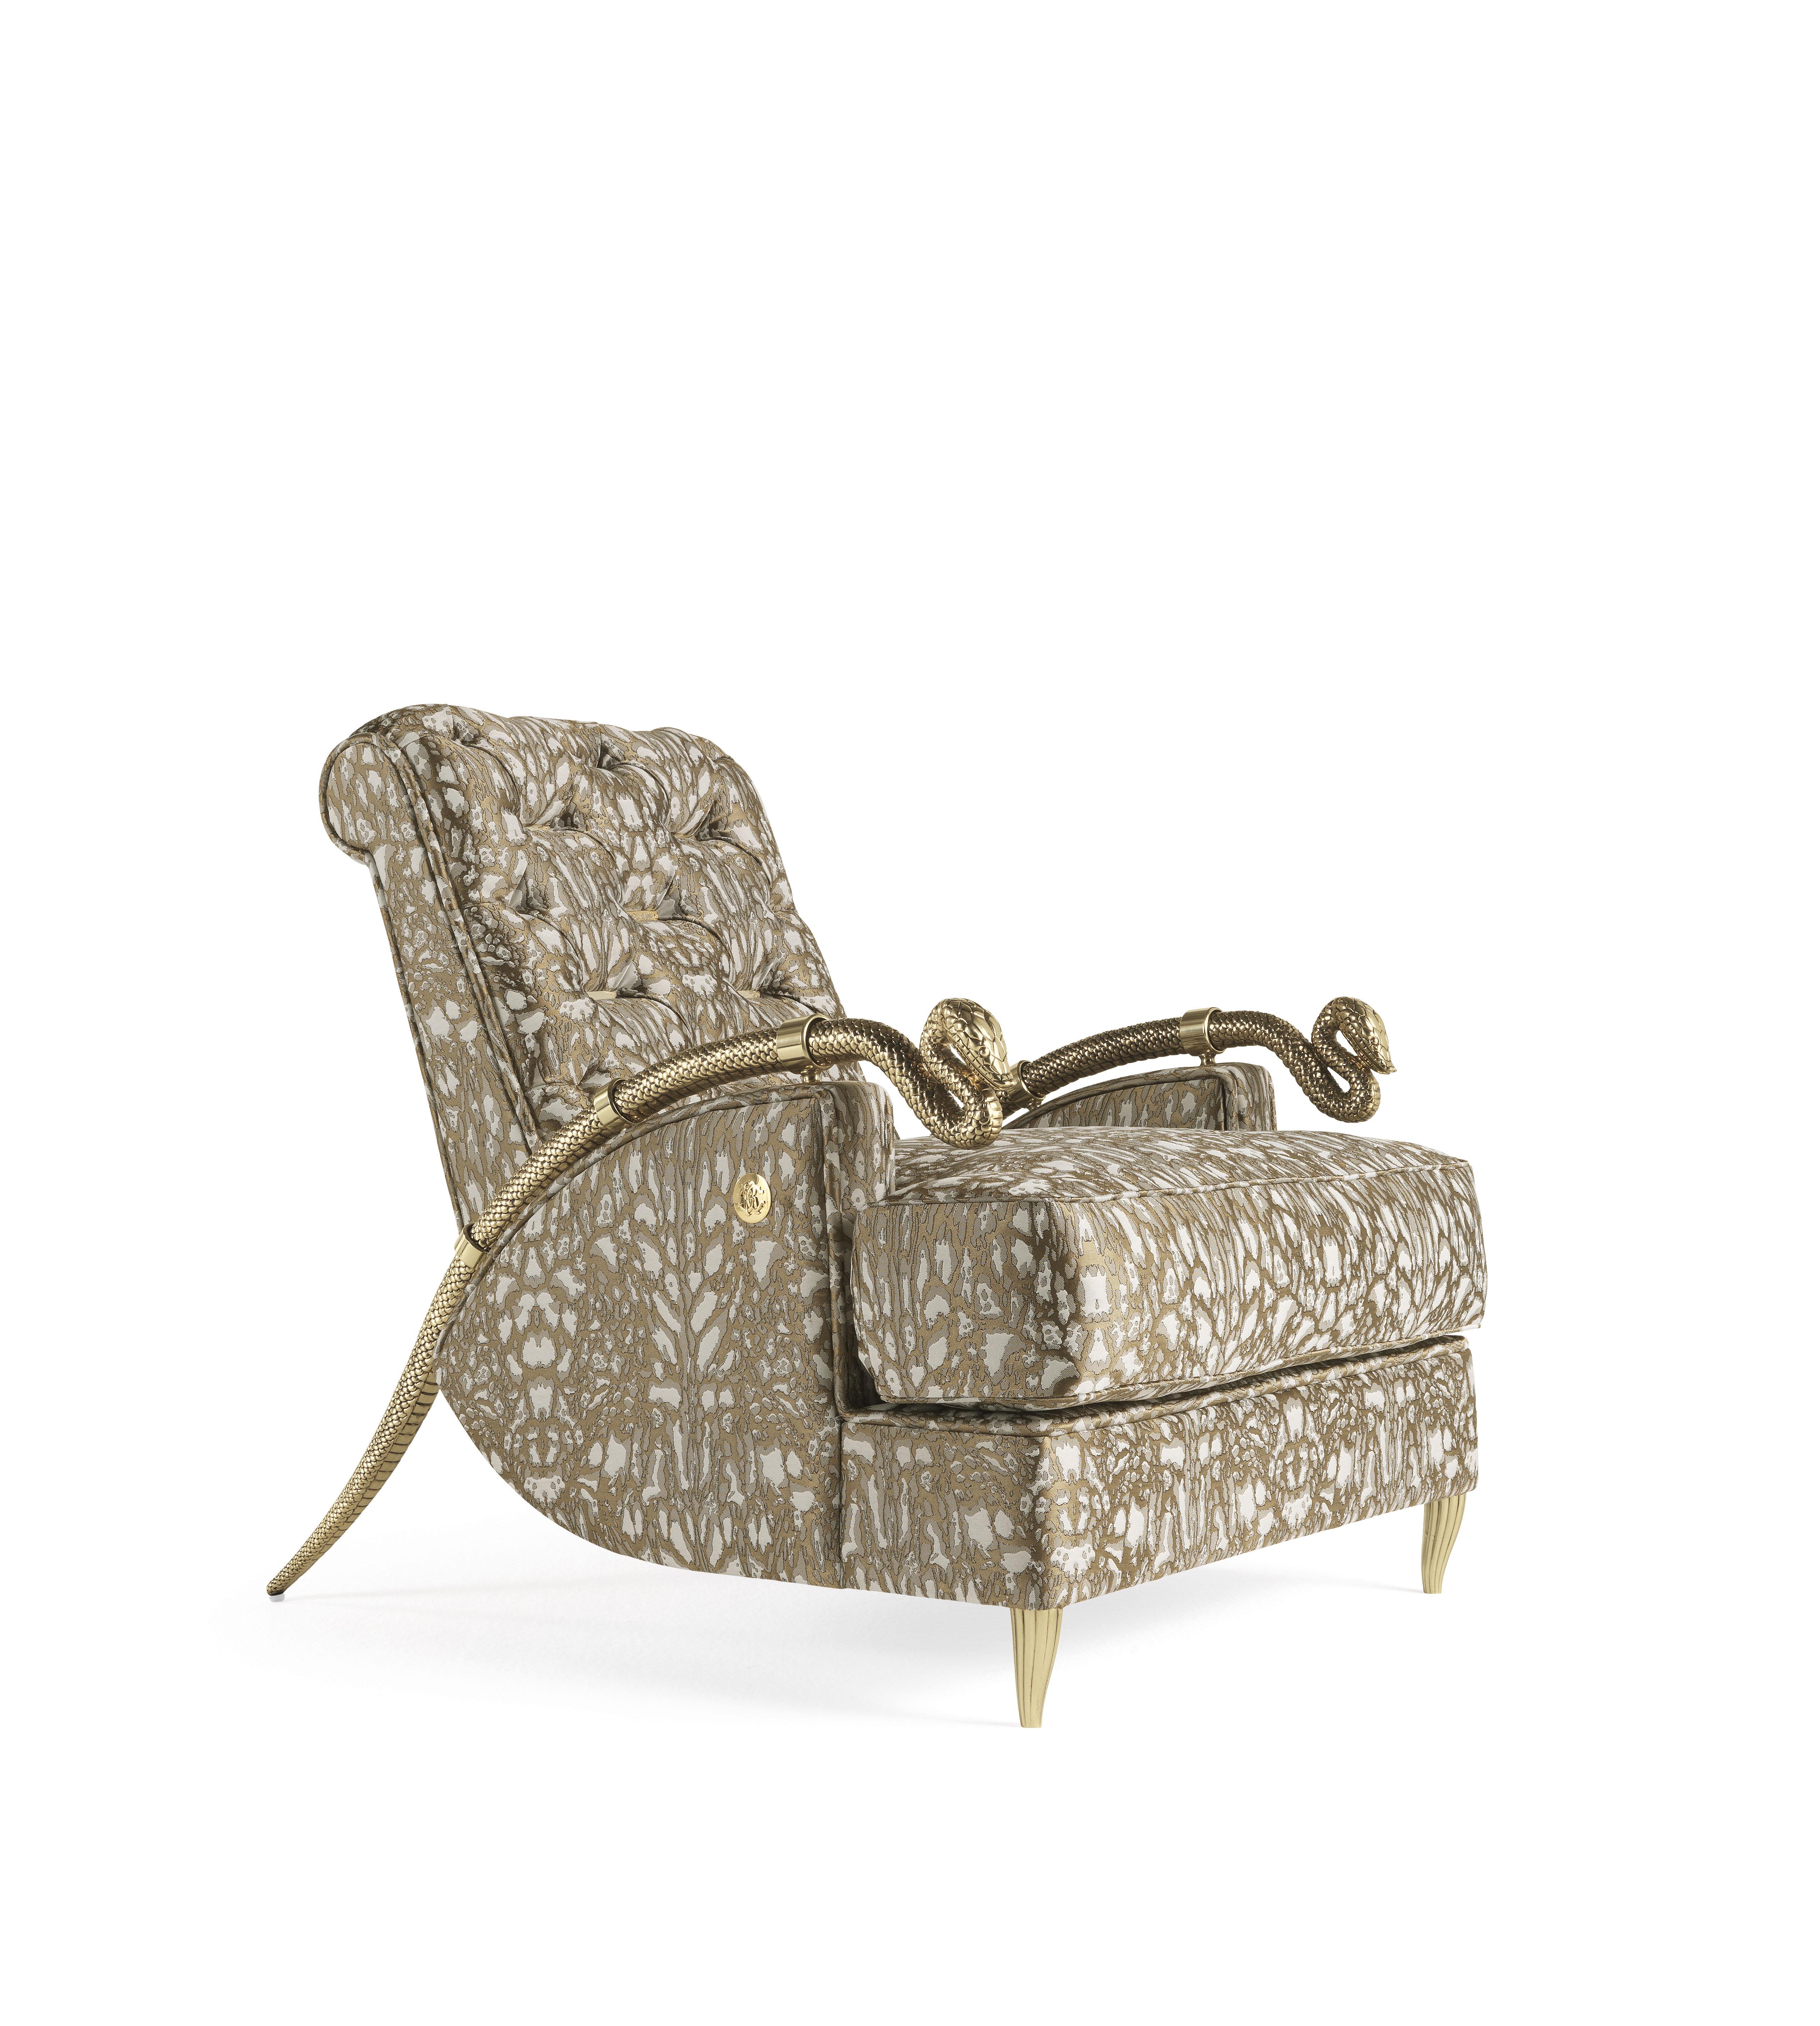 Animals inspire interiors! A really aggressive armchair with the two golden snakes that act as armrests, recalling the rich details used in Roberto Cavalli's world.
Snake Armchair structure in poplar wood and foam. Upholstery in fabric CAT. A Deni